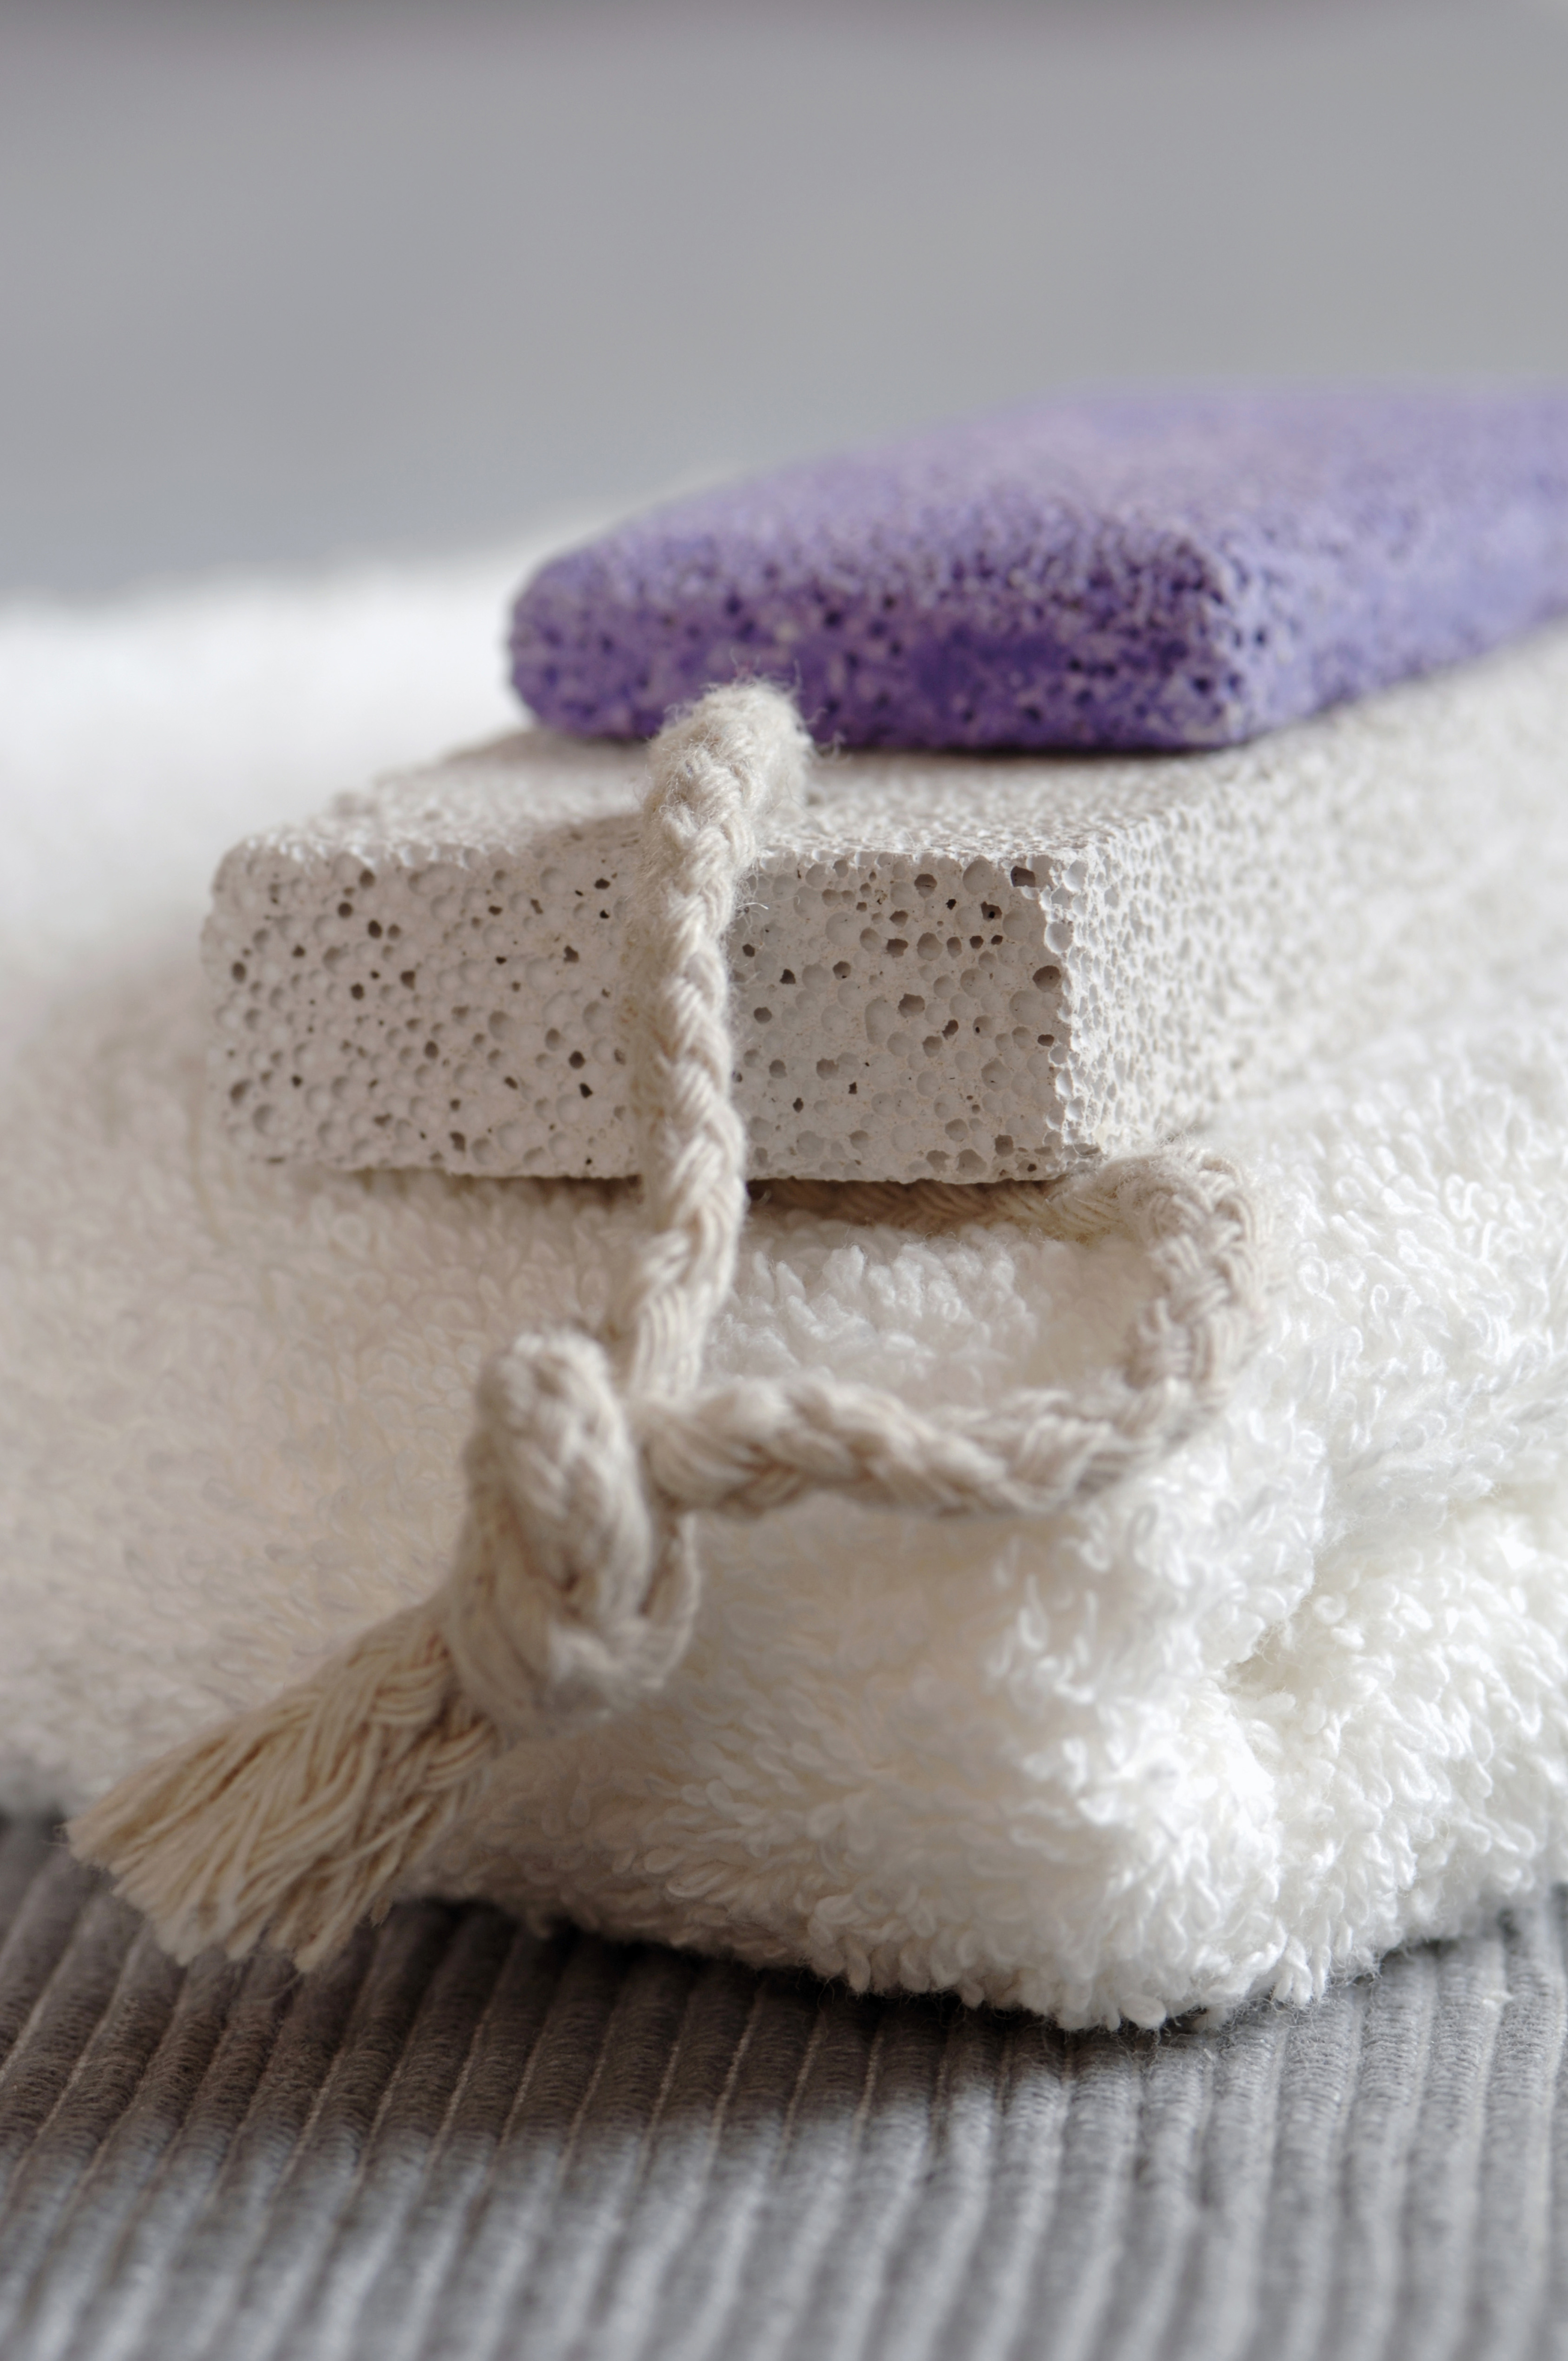 A pumice stone on a towel | Source: Getty Images